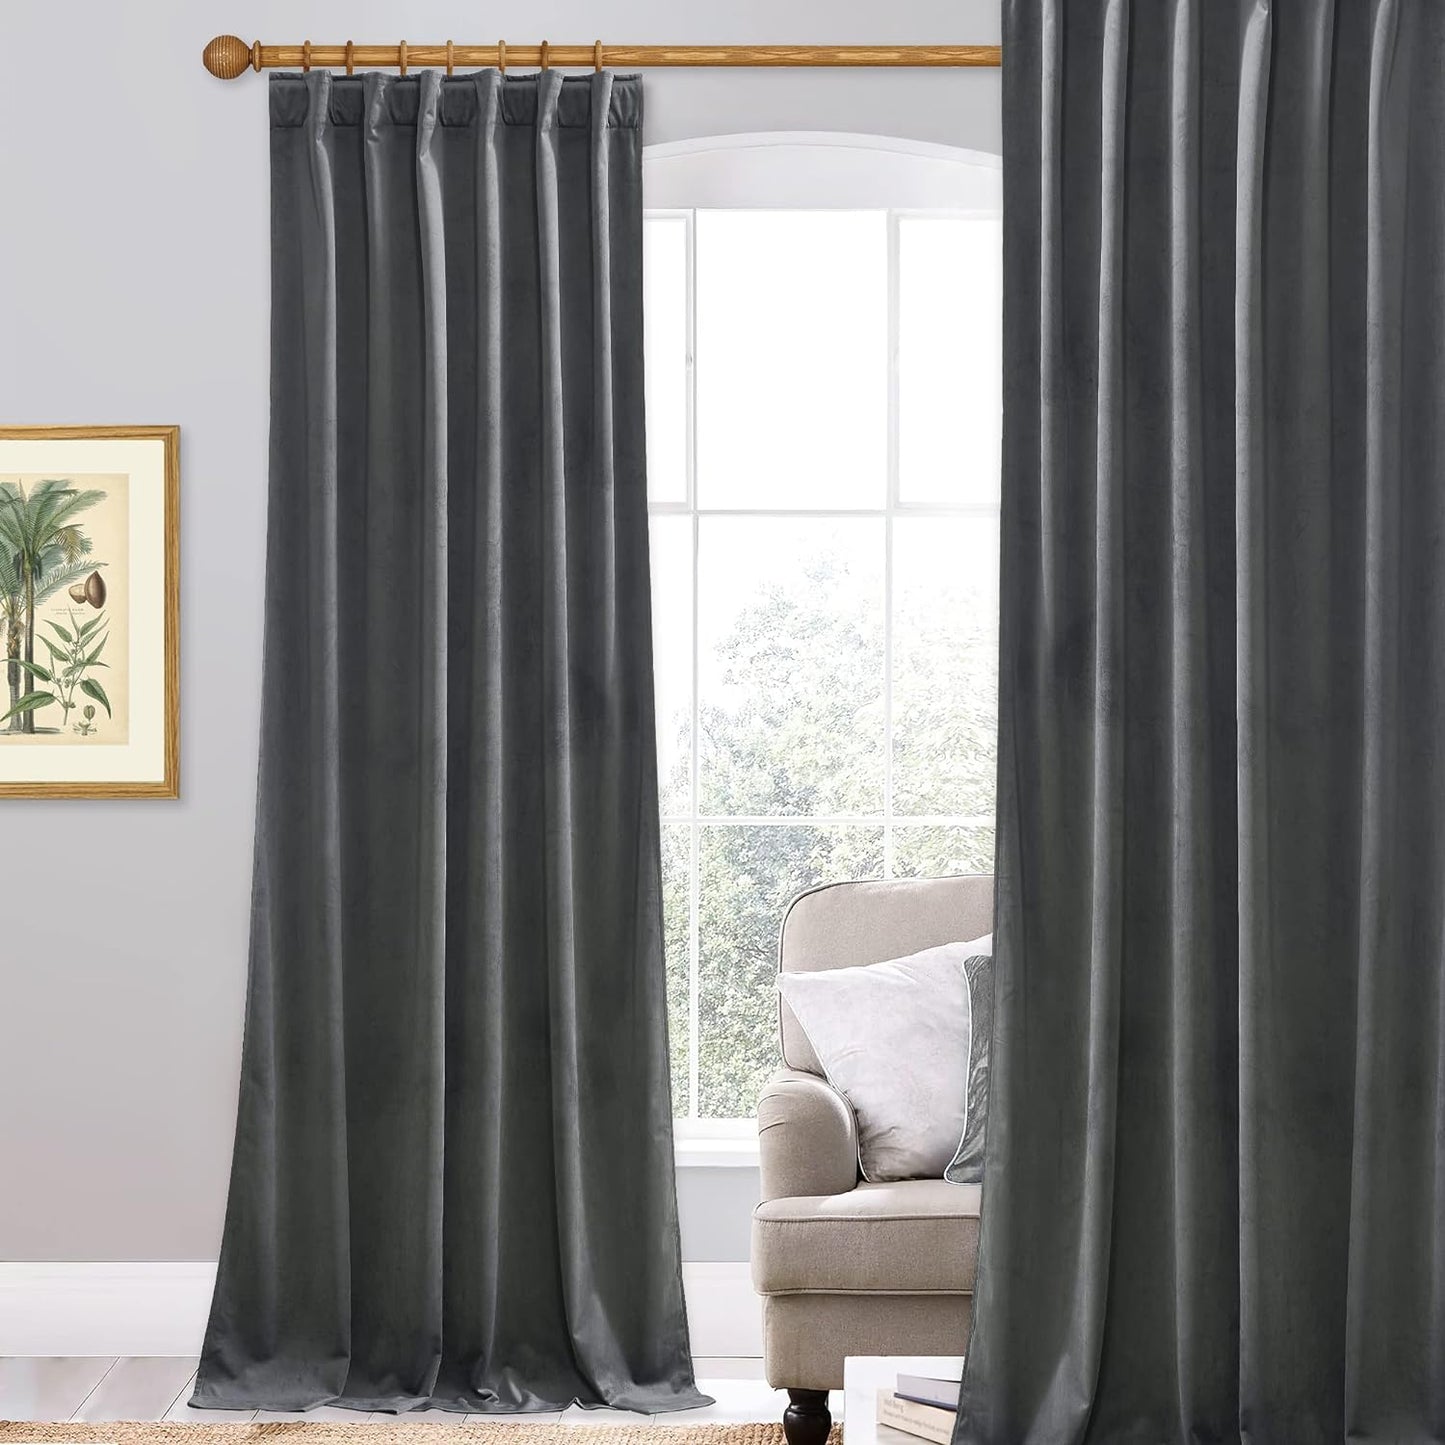 Stangh Navy Blue Velvet Curtains 96 Inches Long for Living Room, Luxury Blackout Sliding Door Curtains Thermal Insulated Window Drapes for Bedroom, W52 X L96 Inches, 1 Panel  StangH Grey W52 X L108 